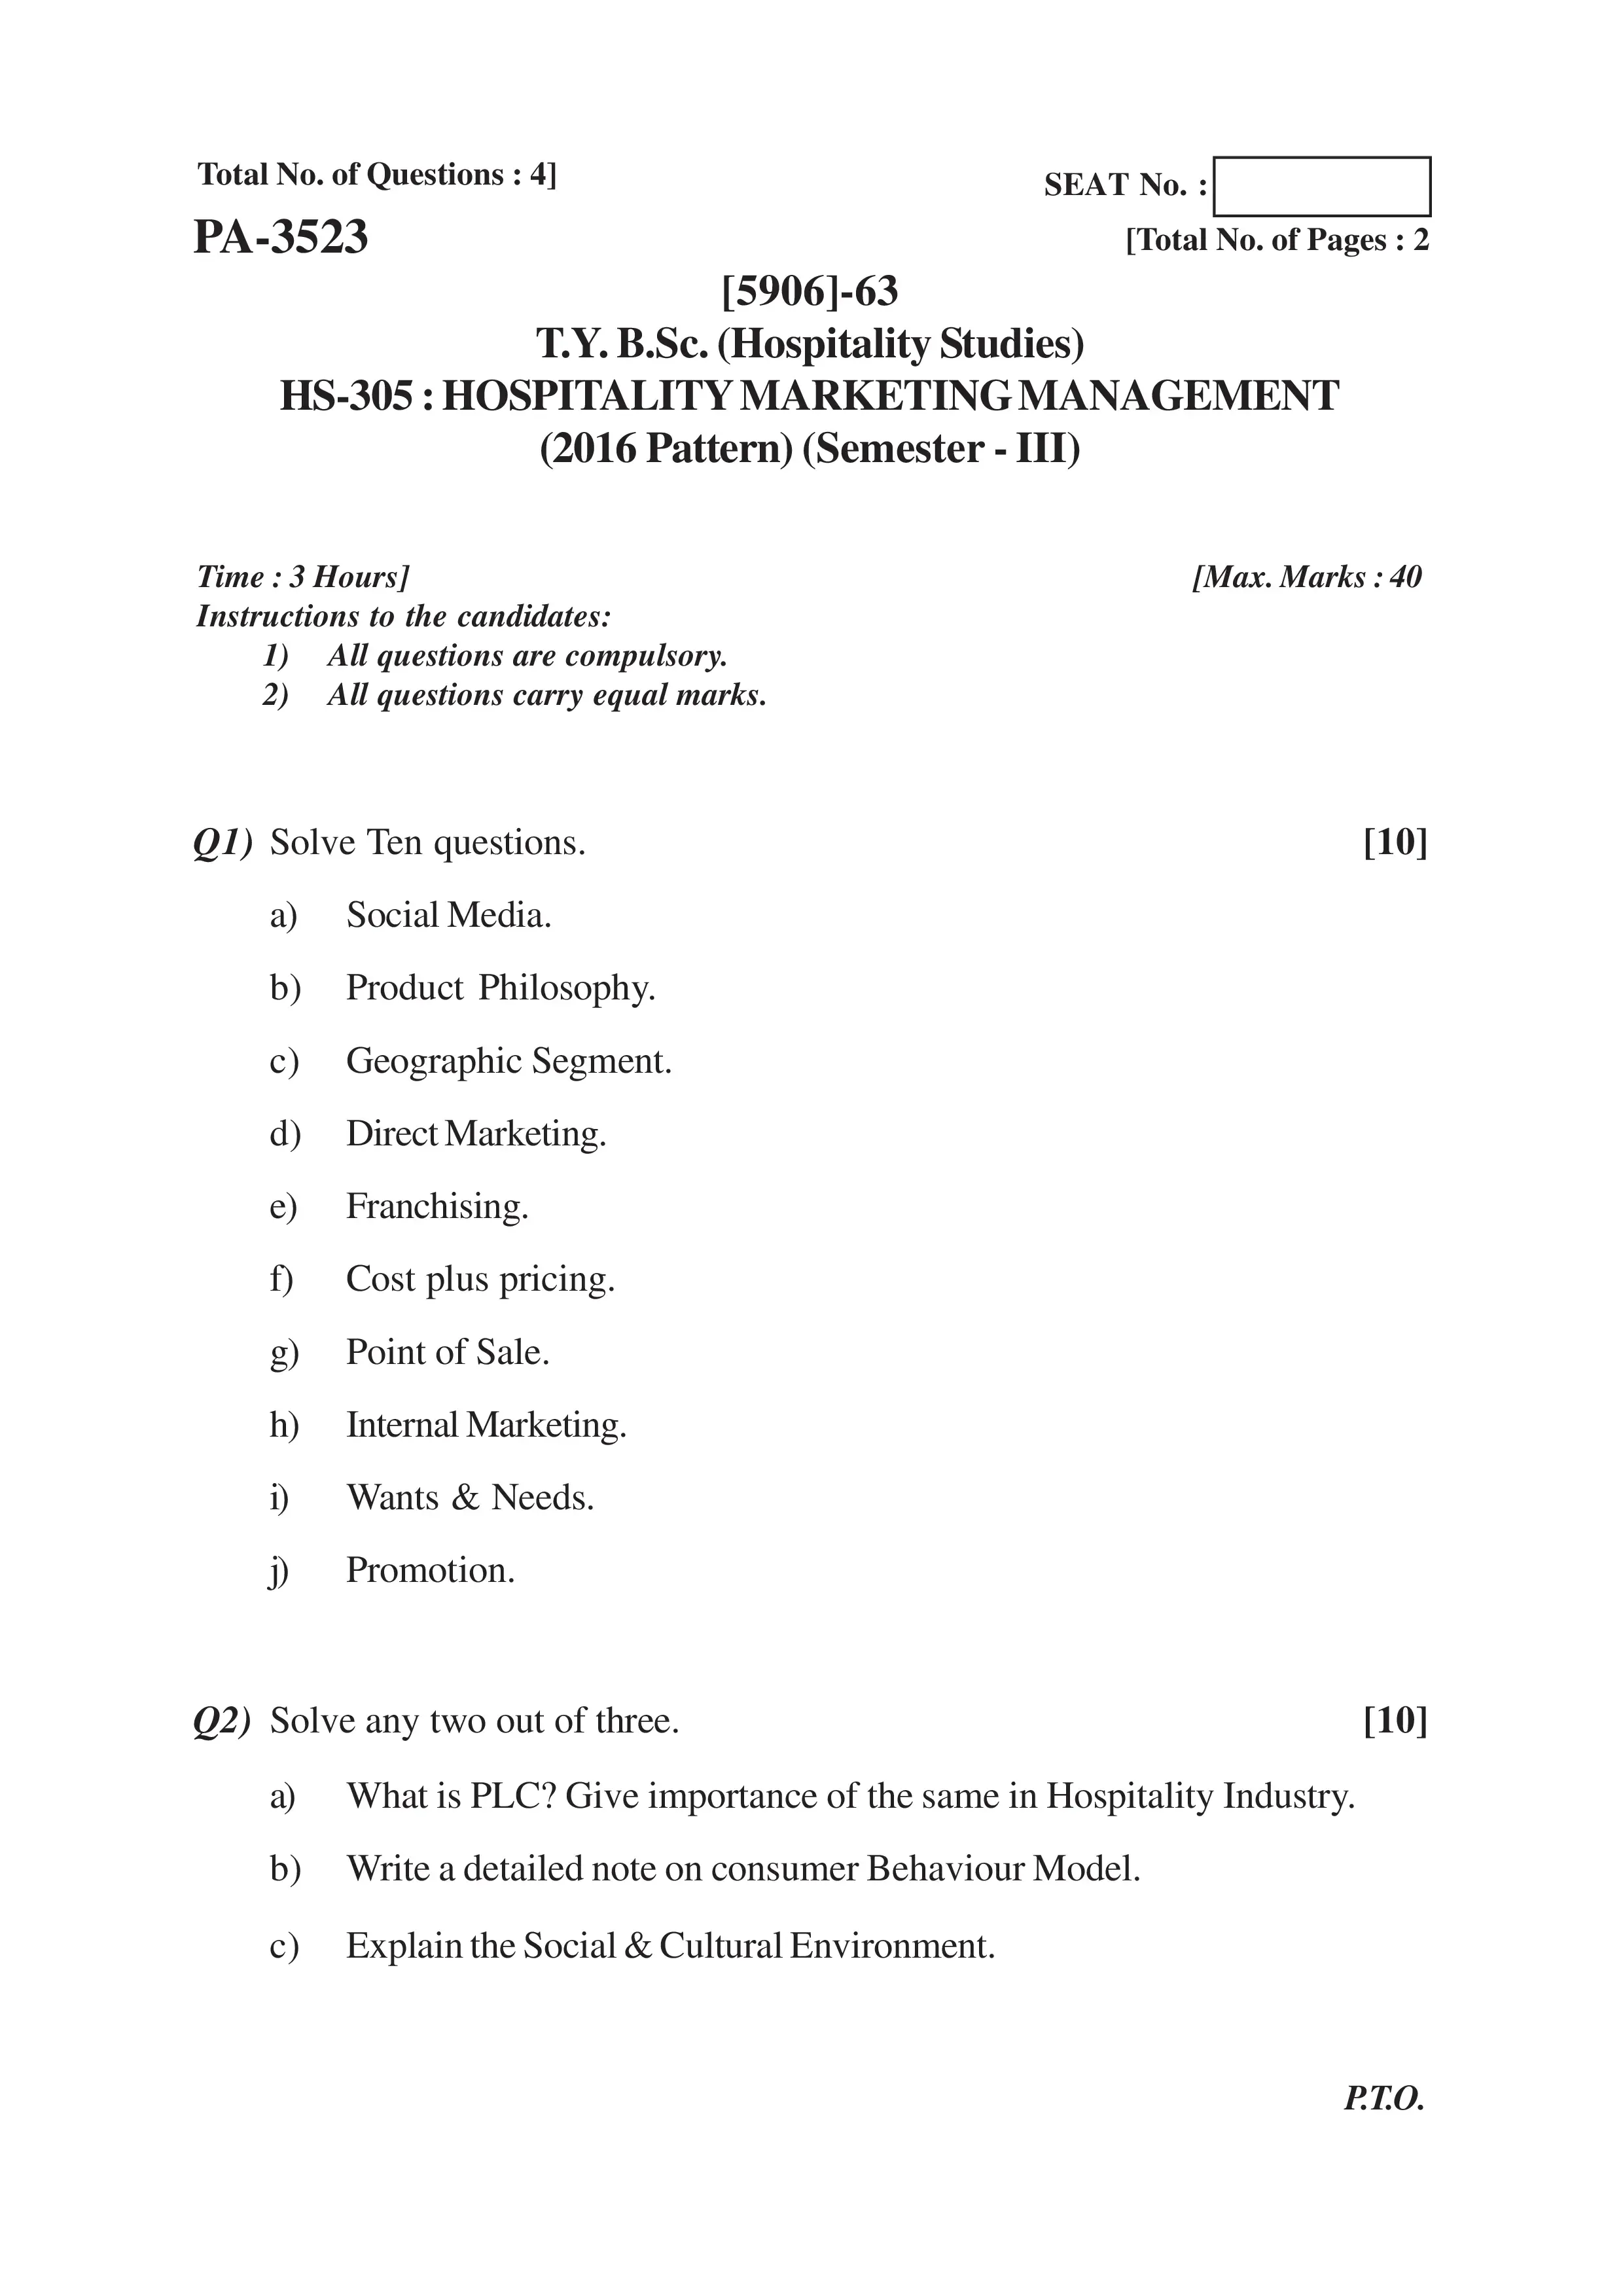 TYBSC(HS) - HOSPITALITY MARKETING MANAGEMENT Question Paper (2016 Pattern)